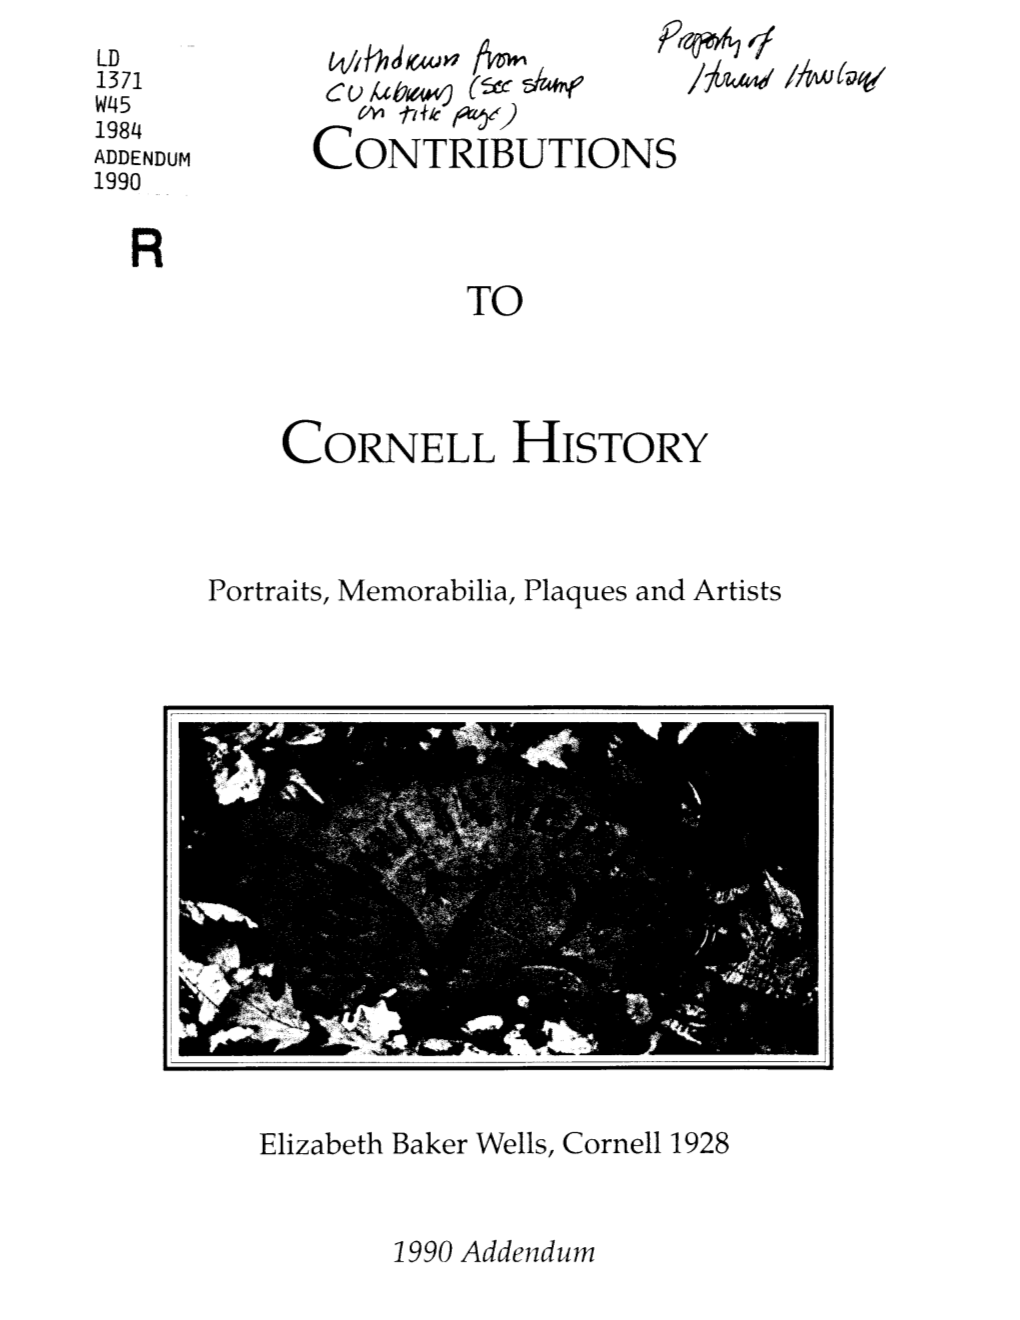 Flvfitf Contributions to Cornell History